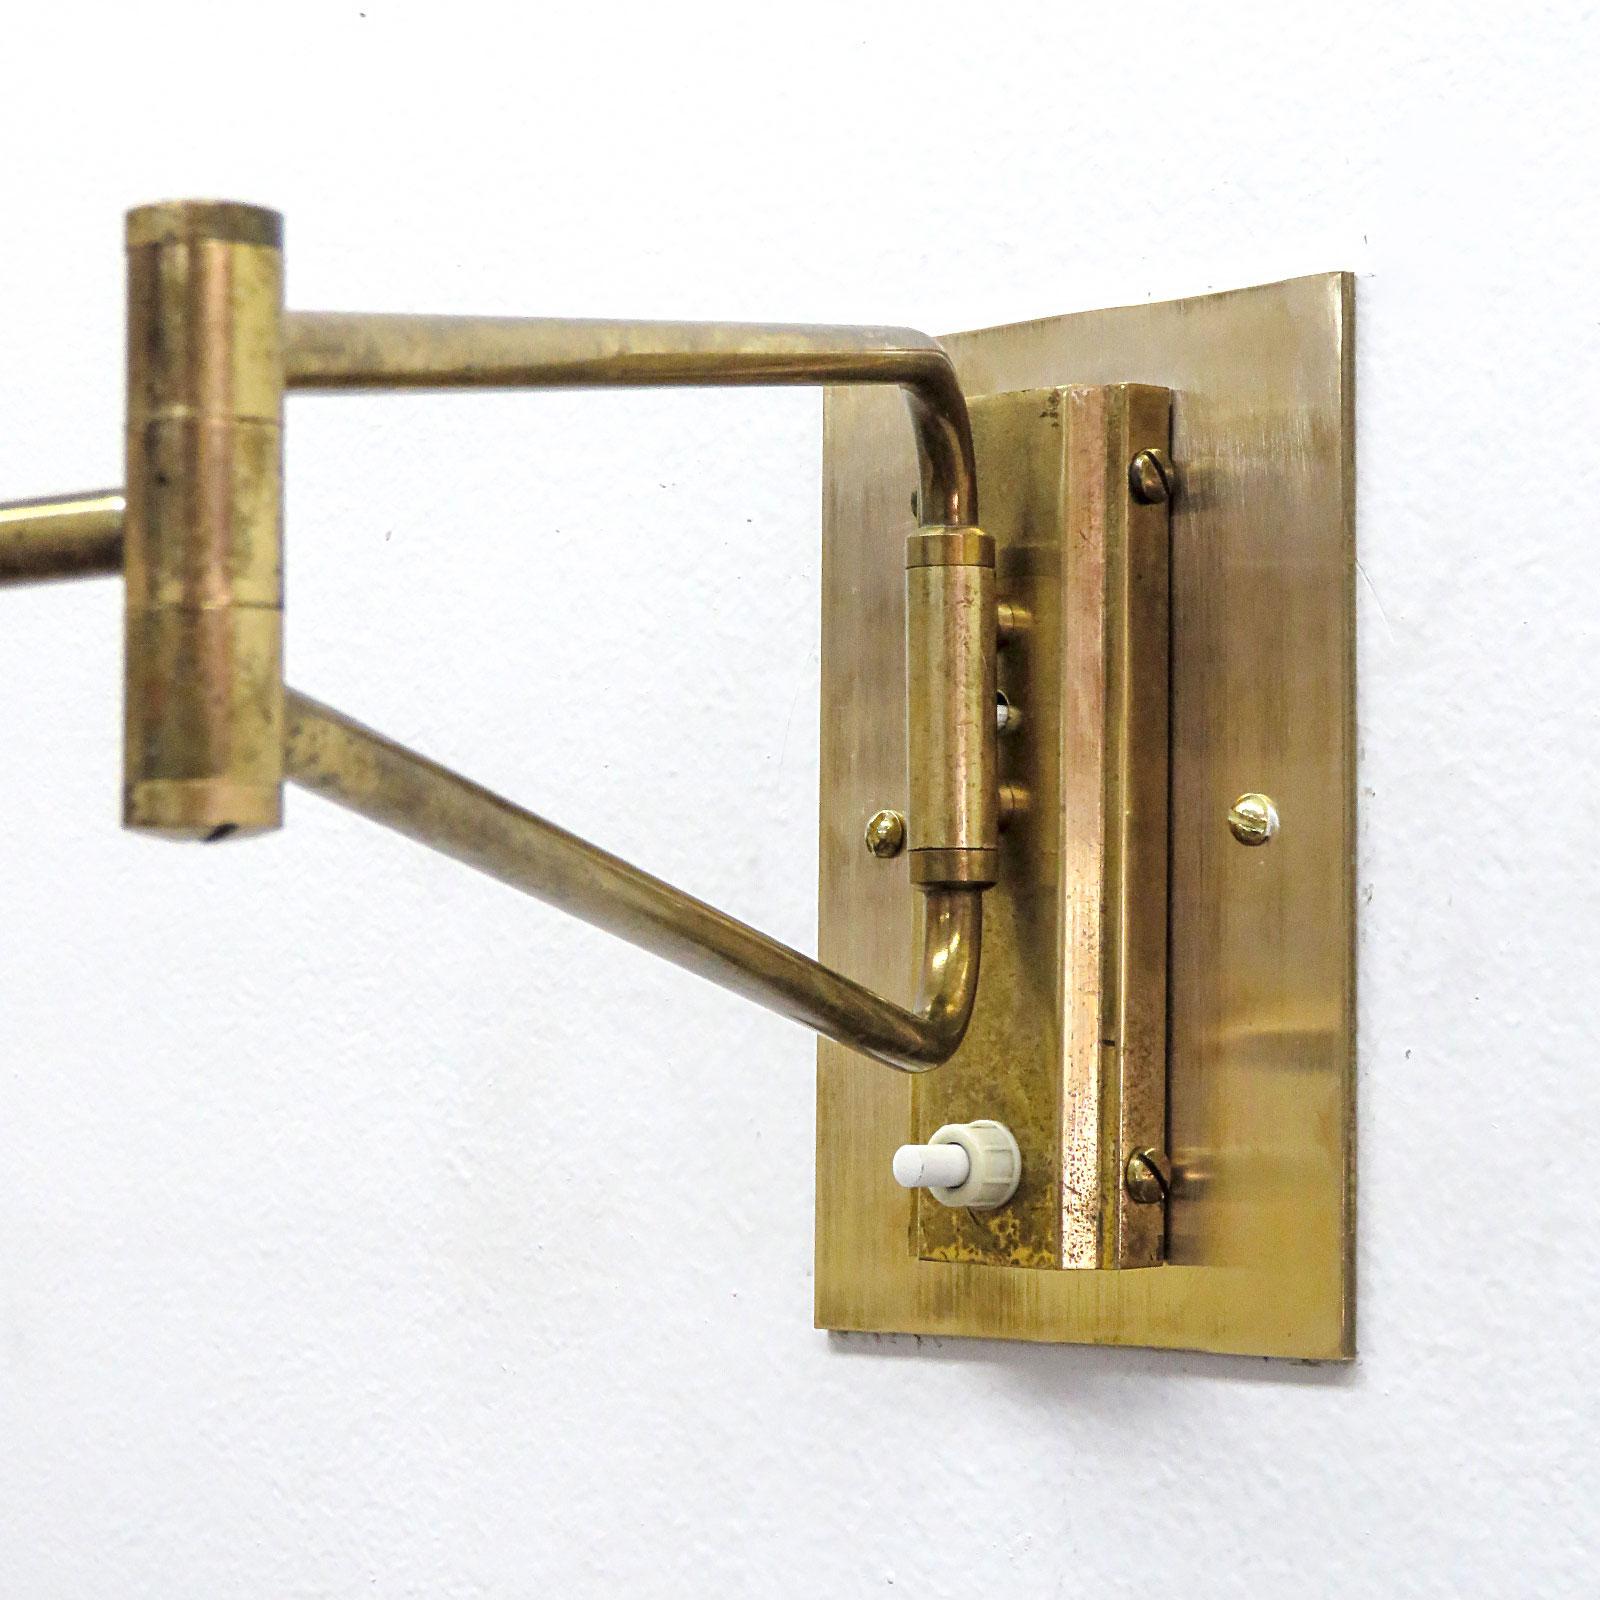 Brass Swing Arm Wall Light by Rene Mathieu for Lunel, 1950 For Sale